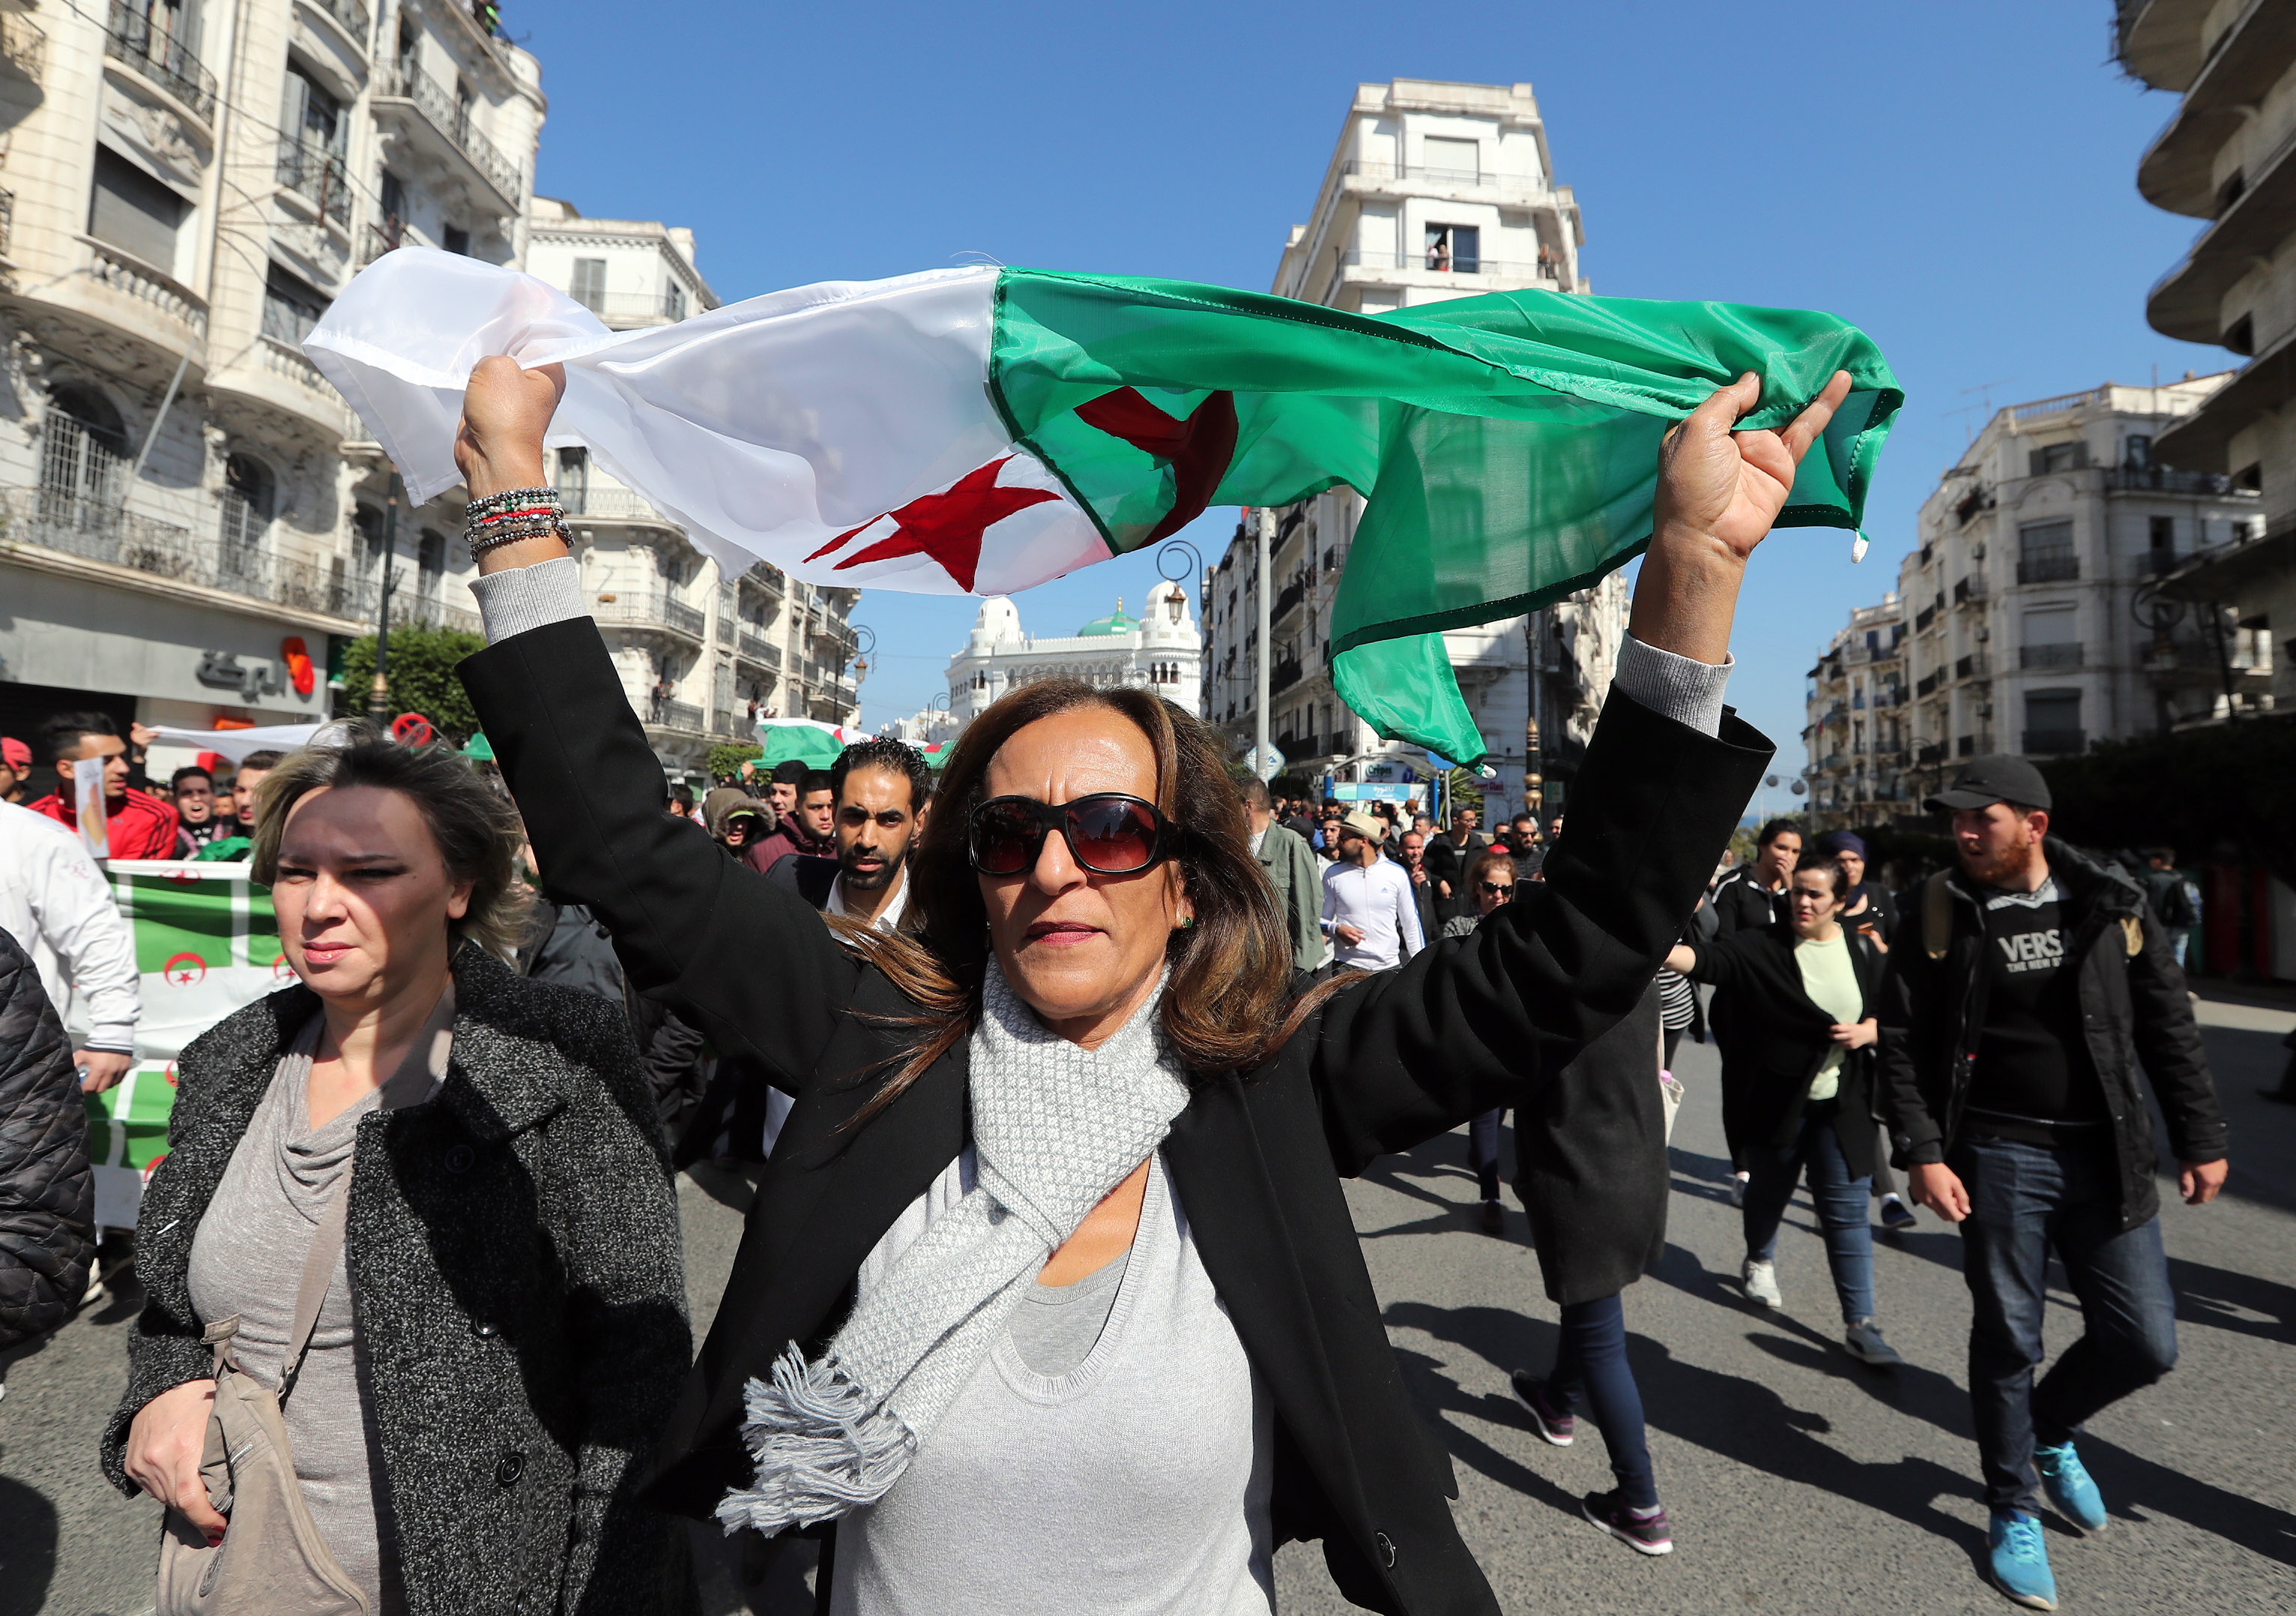 epa07406591 Algerian protesters chant slogans during a protest against the fifth term of Abdelaziz Bouteflika in Algiers, Algeria, 01 March 2019. Algerian authorities on 01 March braced for what are expected to be the largest protests in the Algerian capital in over a decade. Several protests and rallies were held in Algeria since Bouteflika serving as the president since 1999, announced he will be running for a fifth term in presidential elections scheduled for 18 April 2019.  EPA/MOHAMED MESSARA